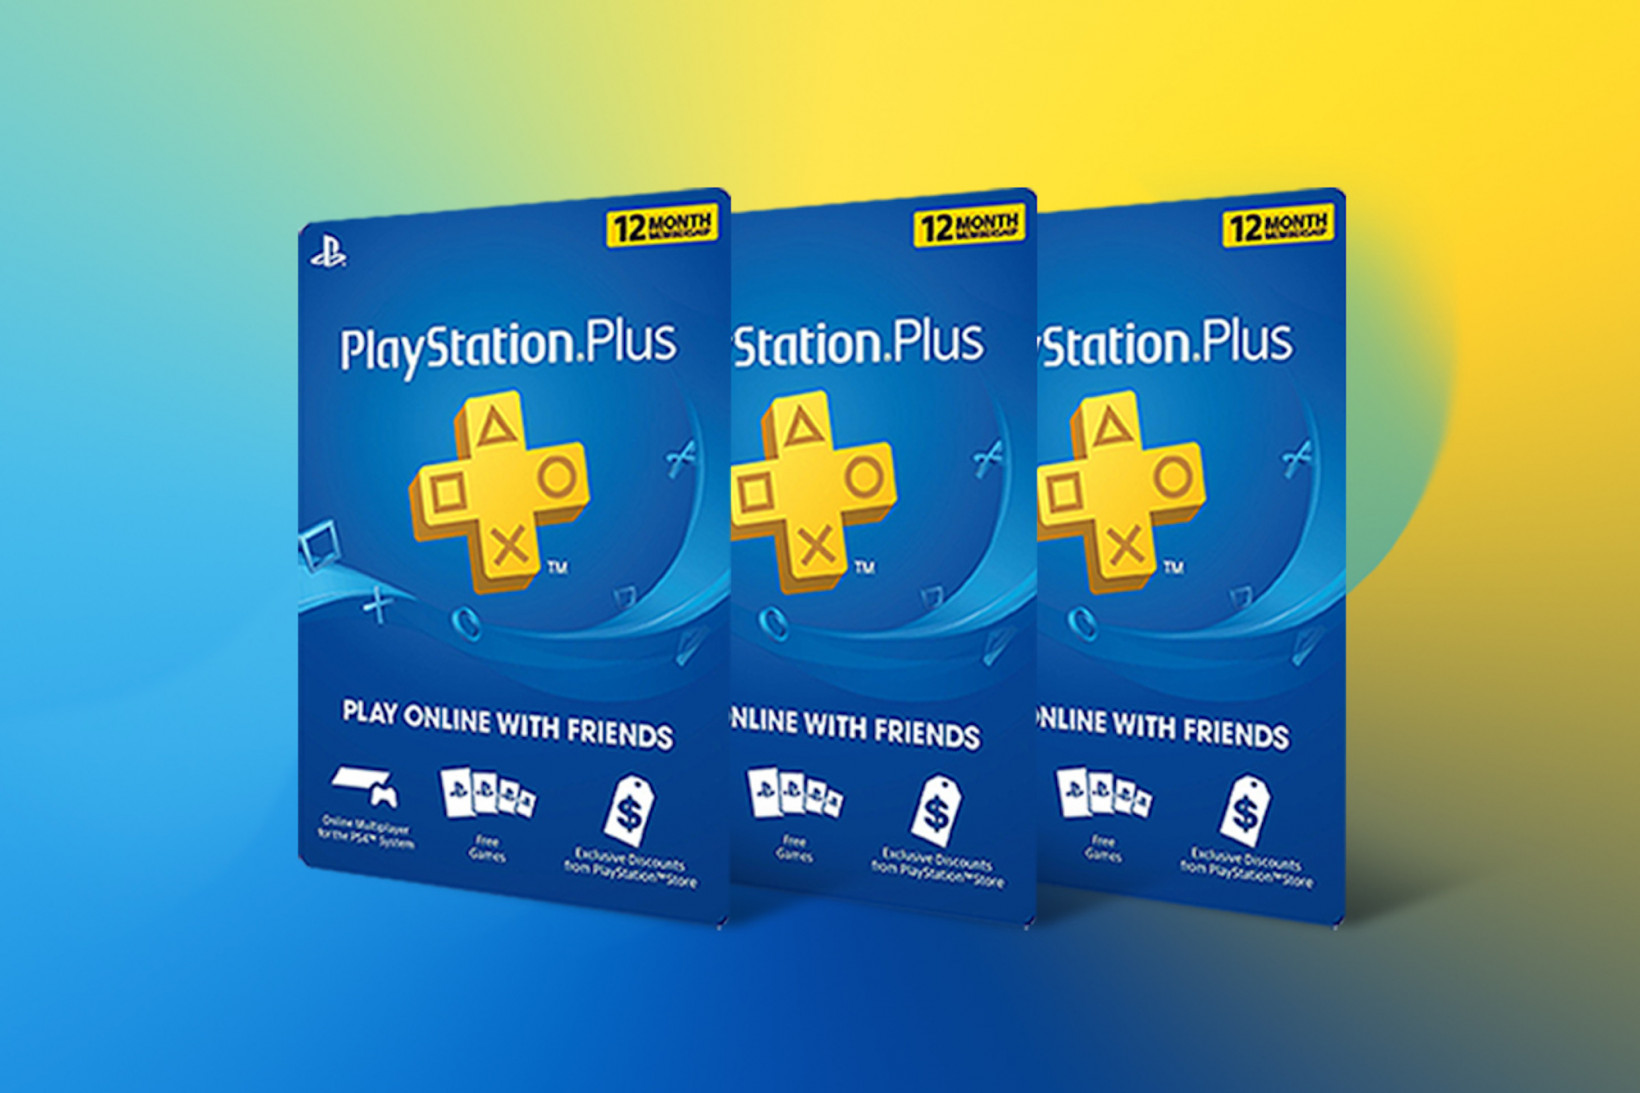 For $90, you can land three years of PlayStation Plus. How you use